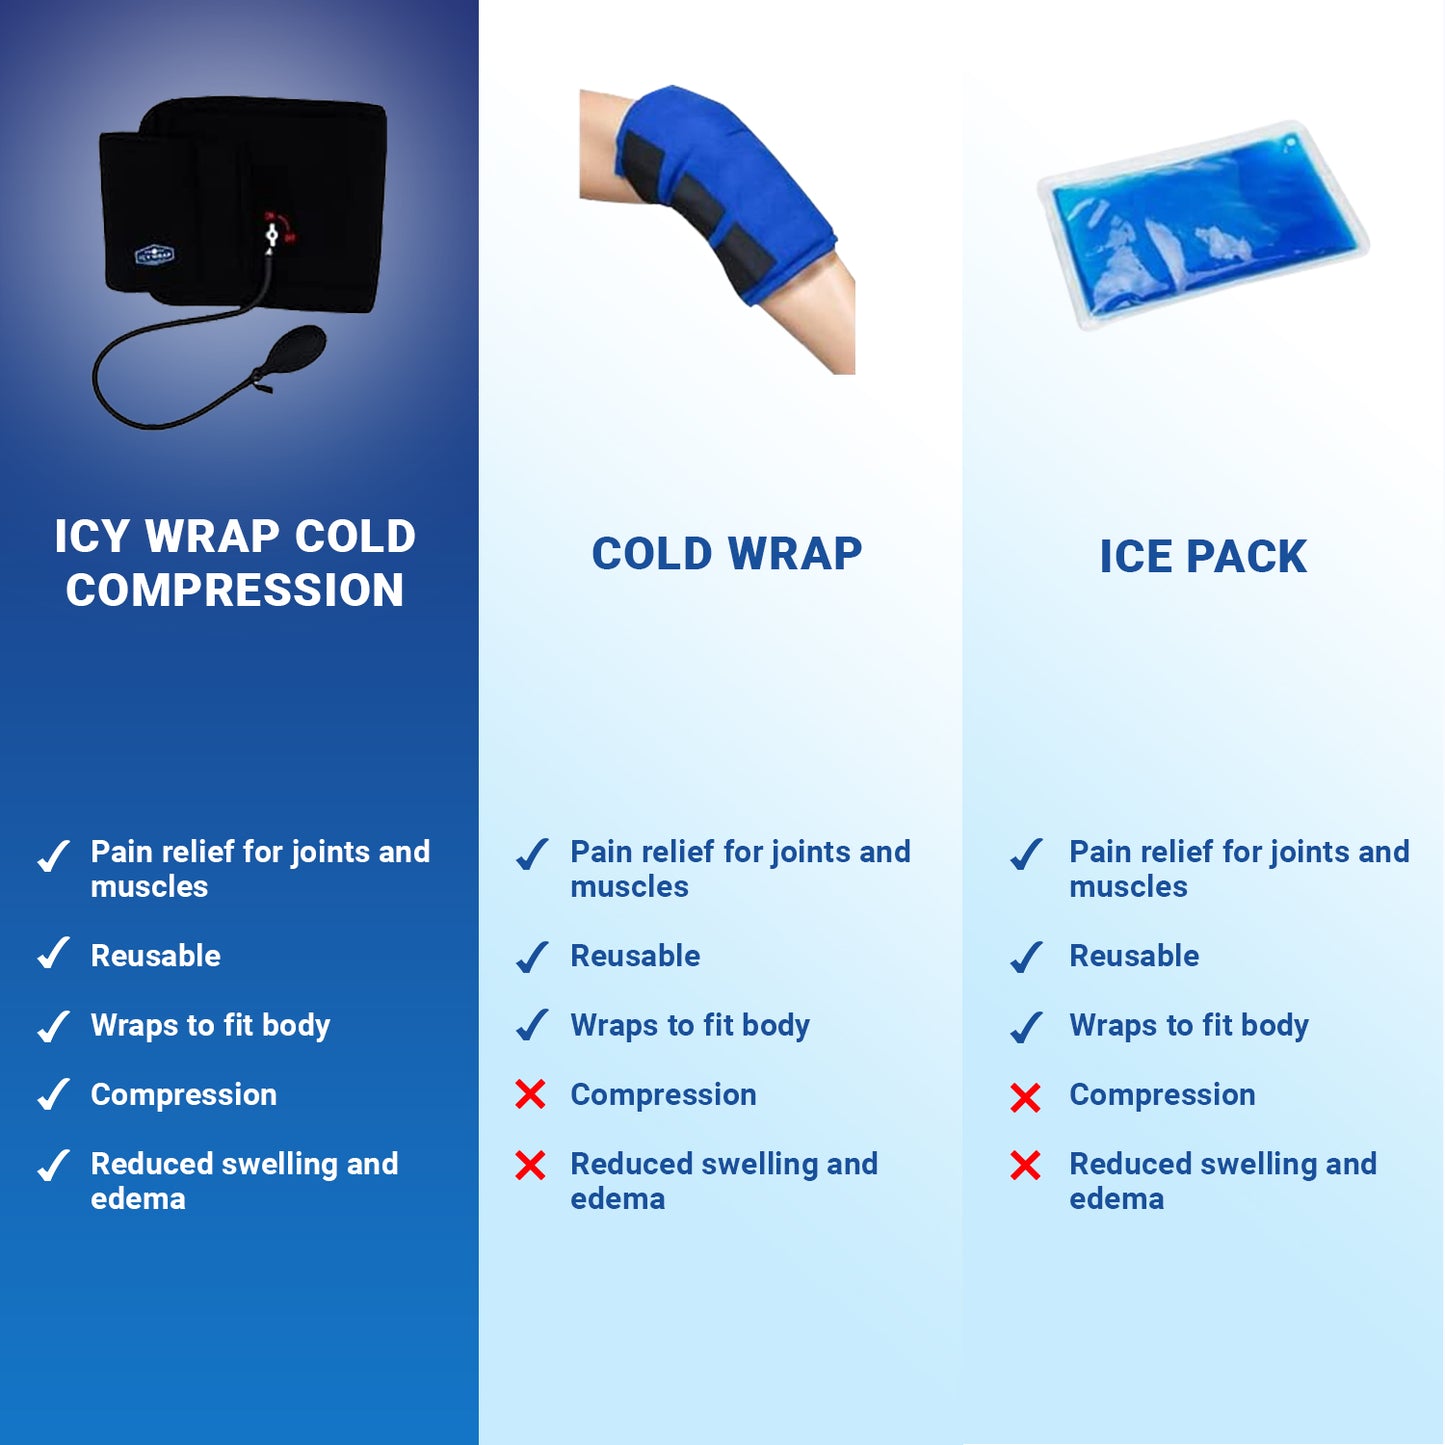 Cold Pack Compression Wrap for Knee by Icy Wrap - Ice Pack Therapy Cryo-Cool Flexible Treatment for Injuries, Aches, Swelling, Sprains, Inflammation